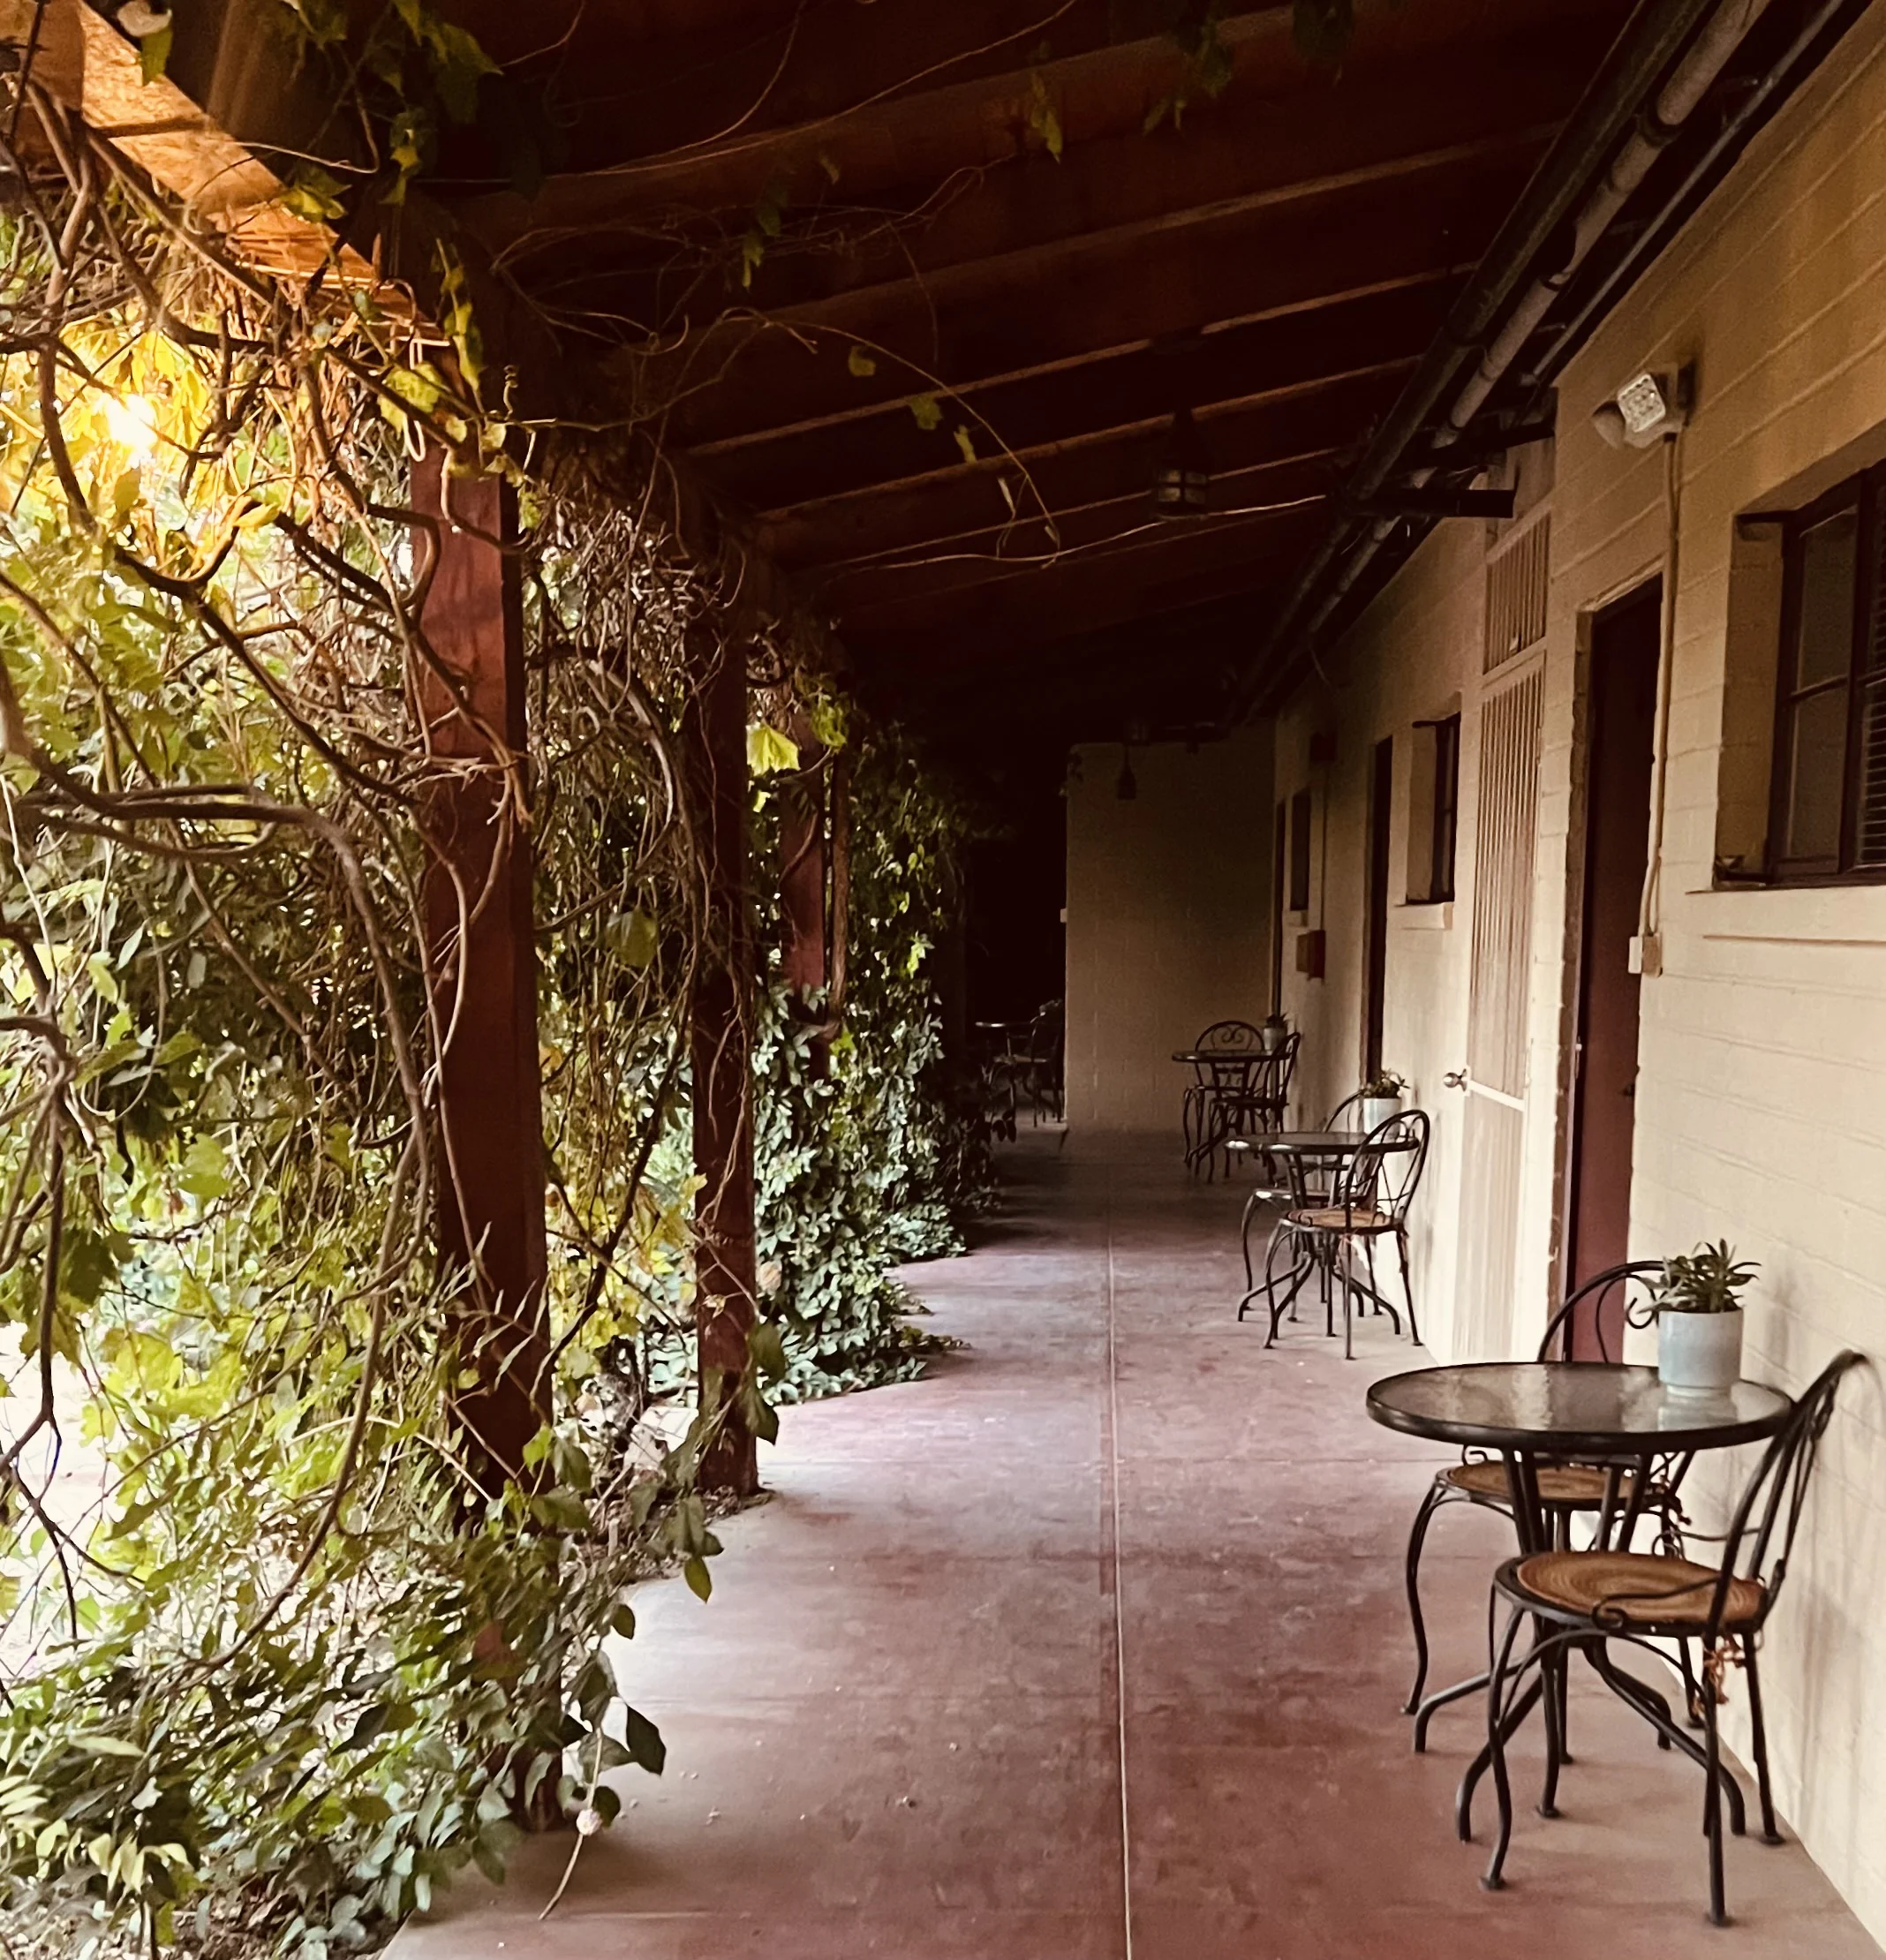 A covered outdoor hall way with flowers and vines to the left and hotel room doors with tables and chairs to the right. Rust Red sidewalk